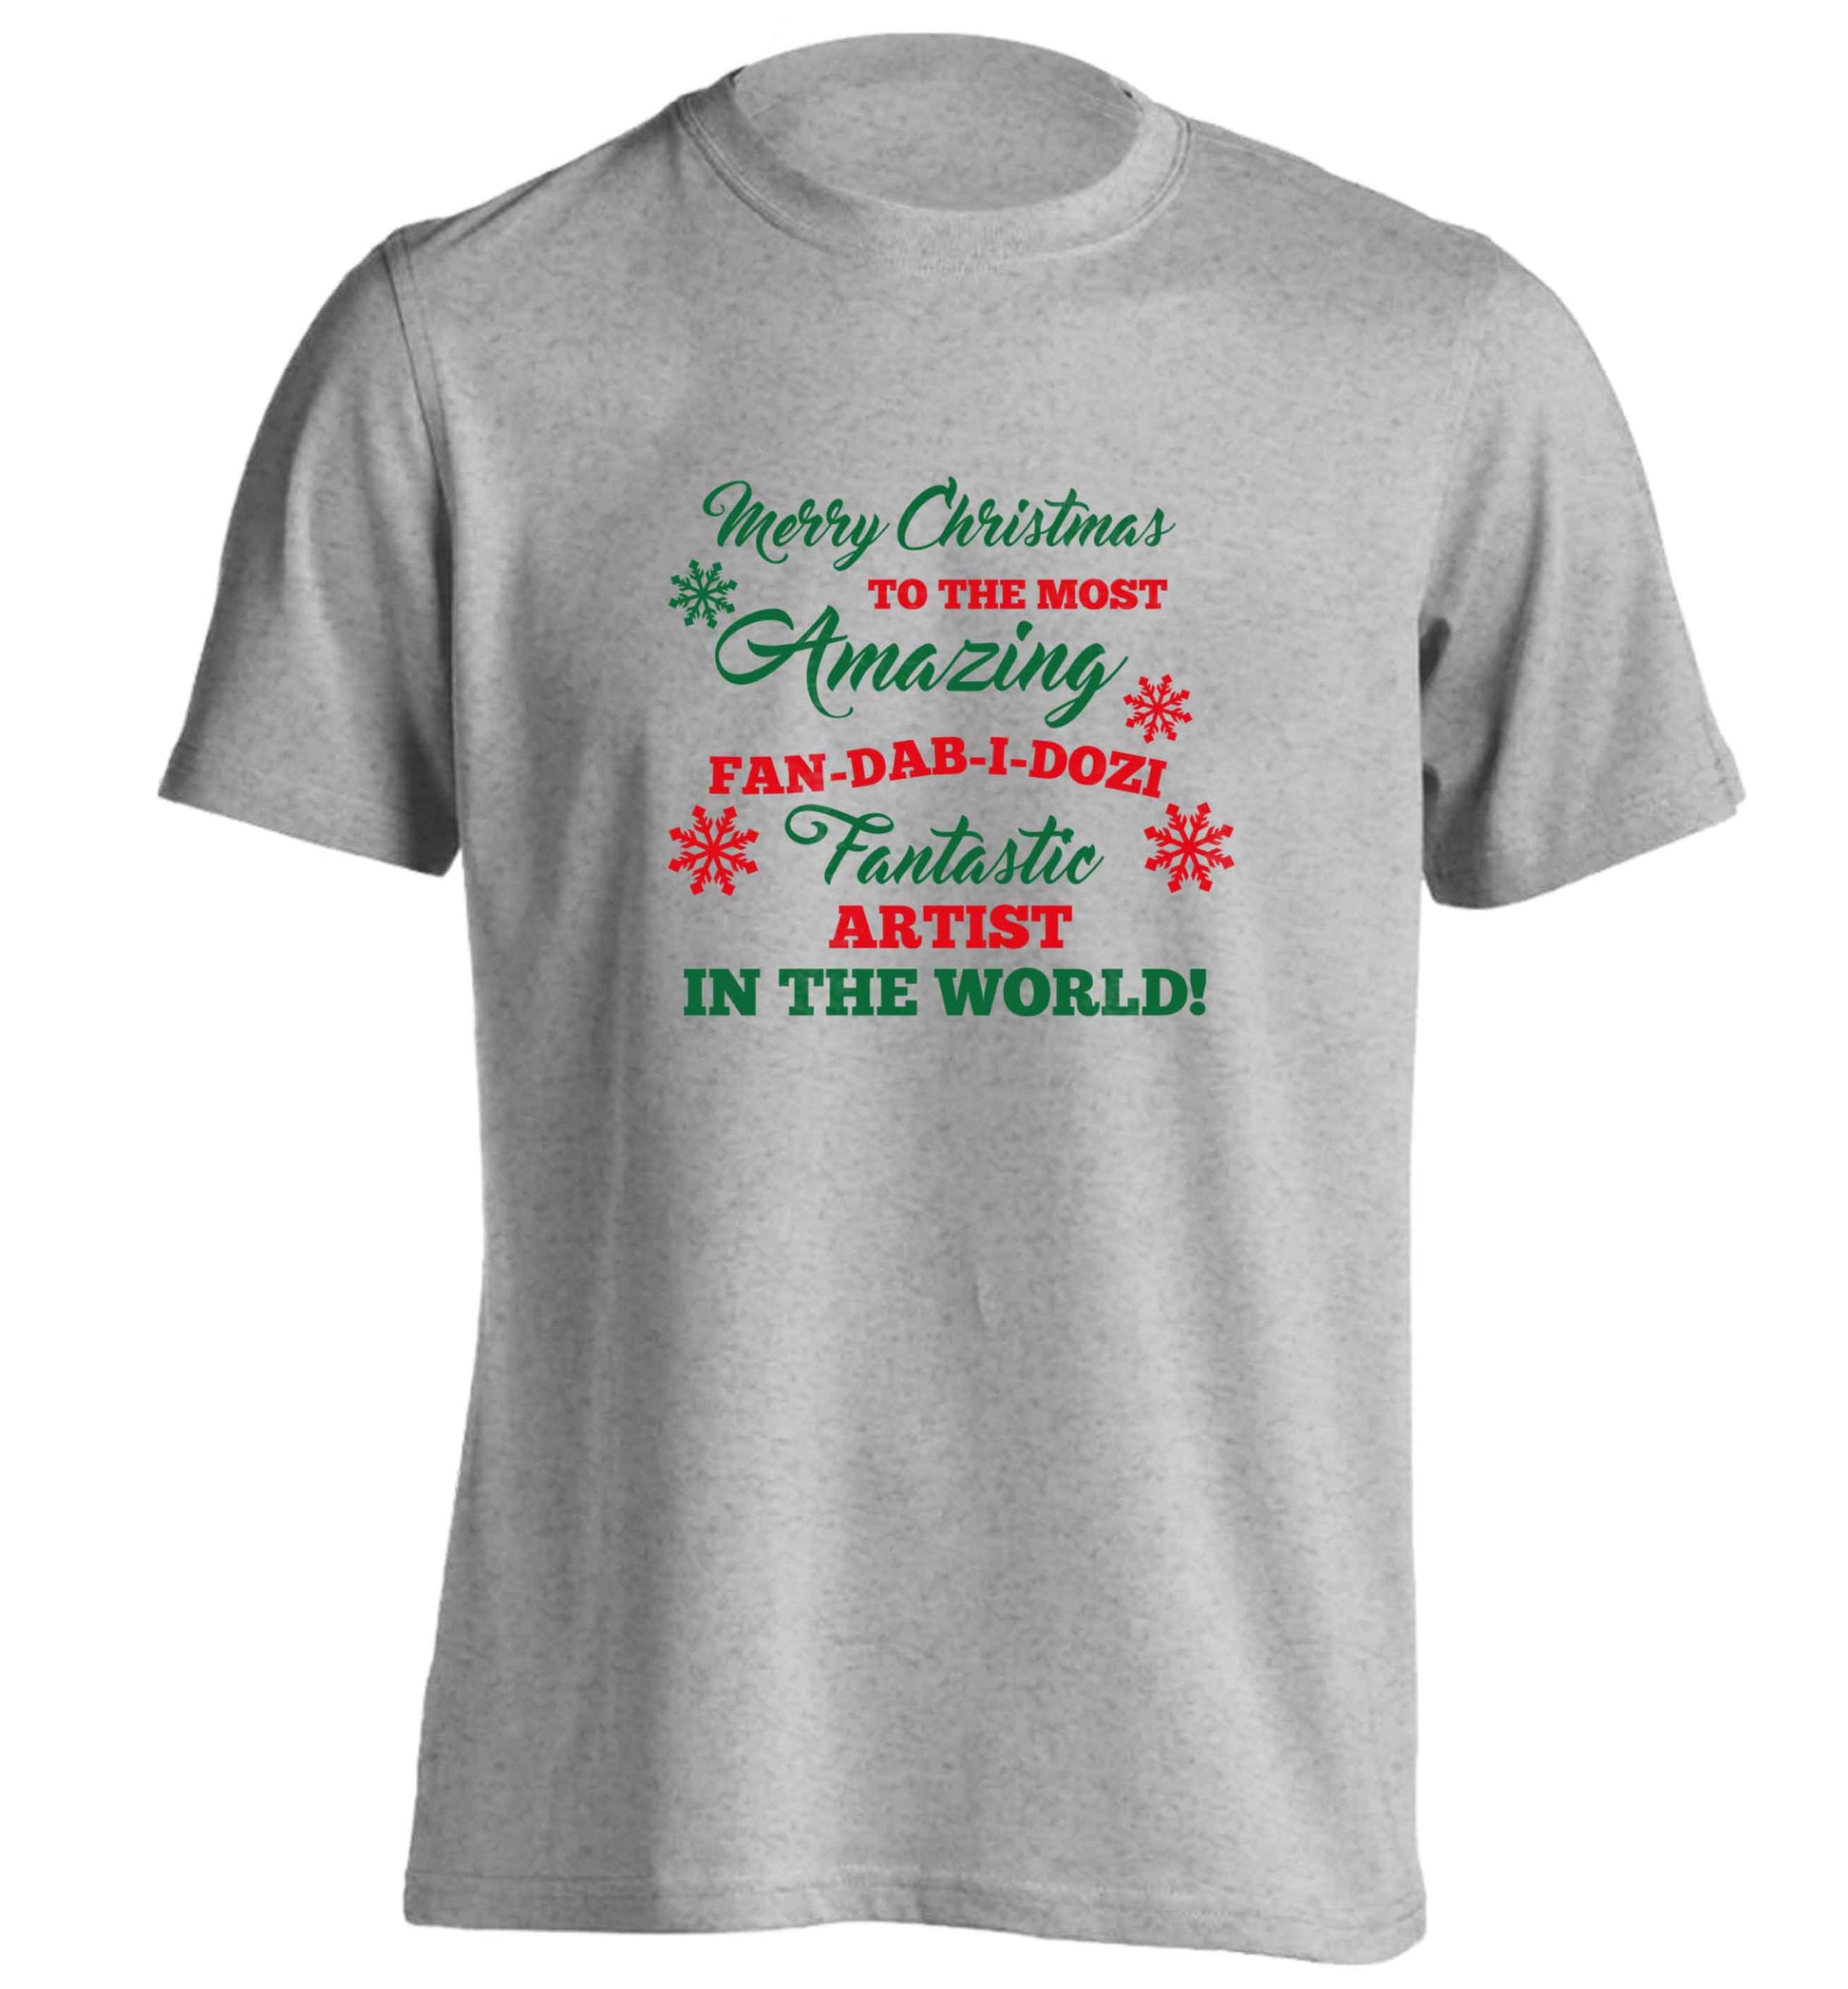 Merry Christmas to the most amazing artist in the world! adults unisex grey Tshirt 2XL